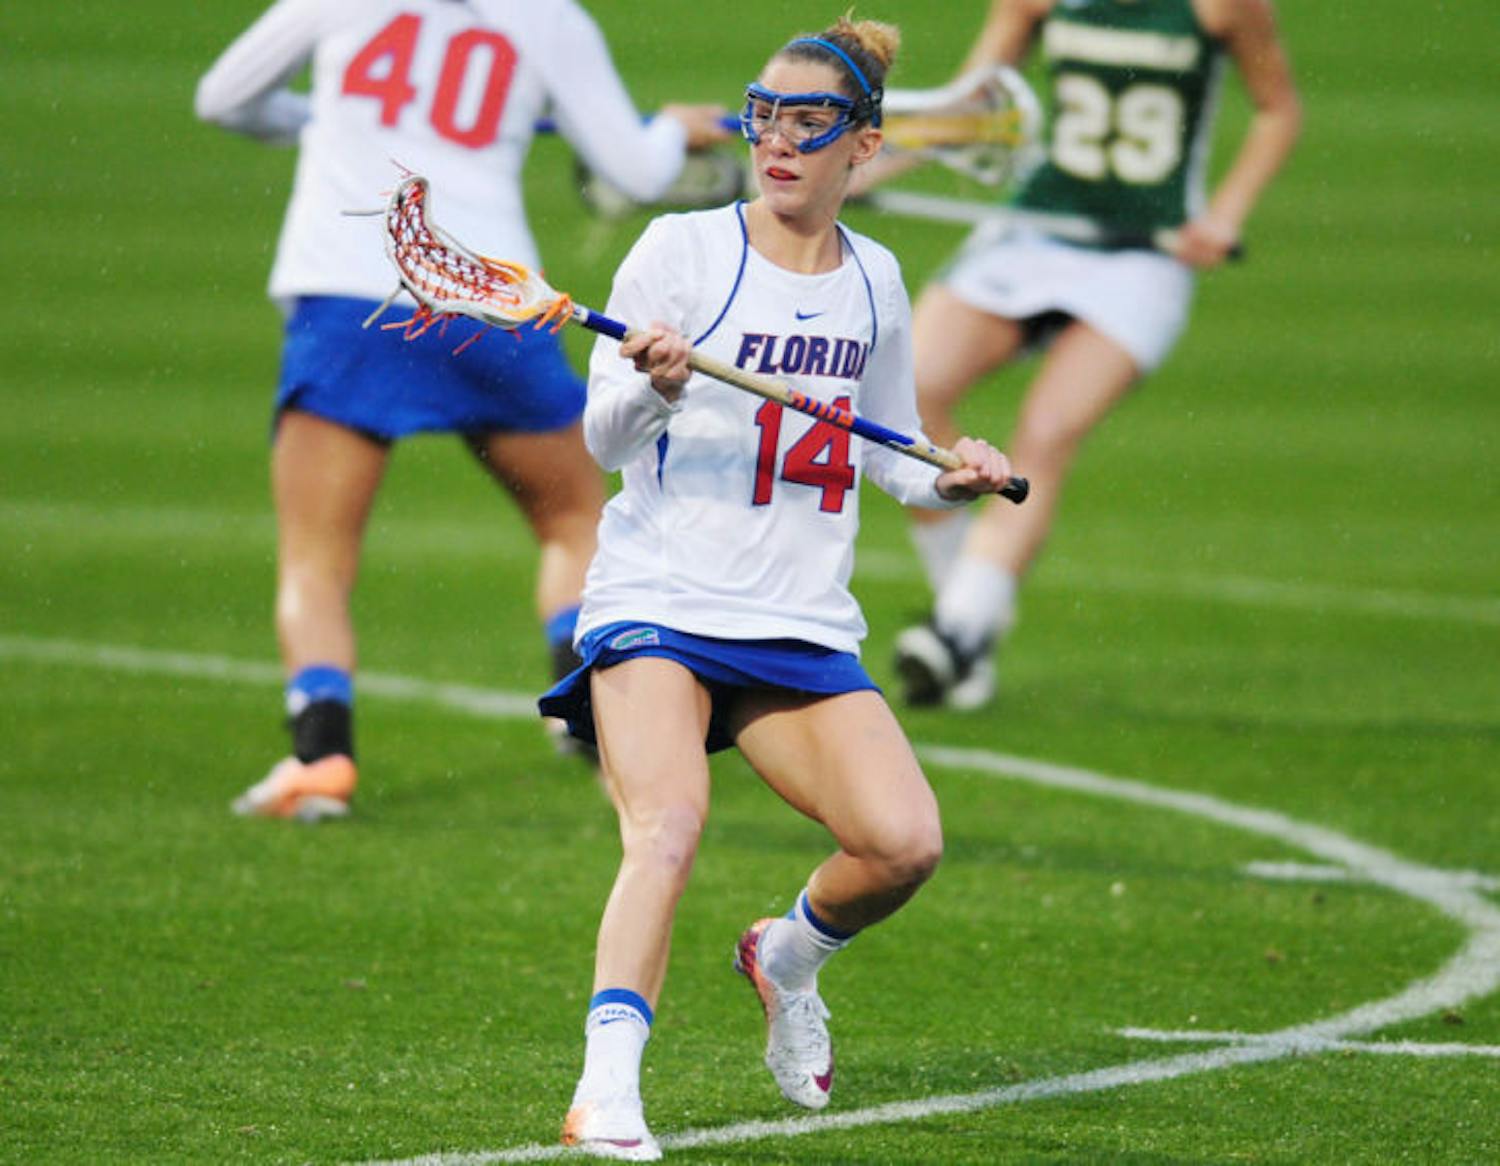 Nora Barry drives toward the ball during Florida’s 21-5 win against Jacksonville on Feb. 12 at Donald R. Dizney Stadium. Barry had one assist in Florida’s 13-9 win against Penn State on Sunday.